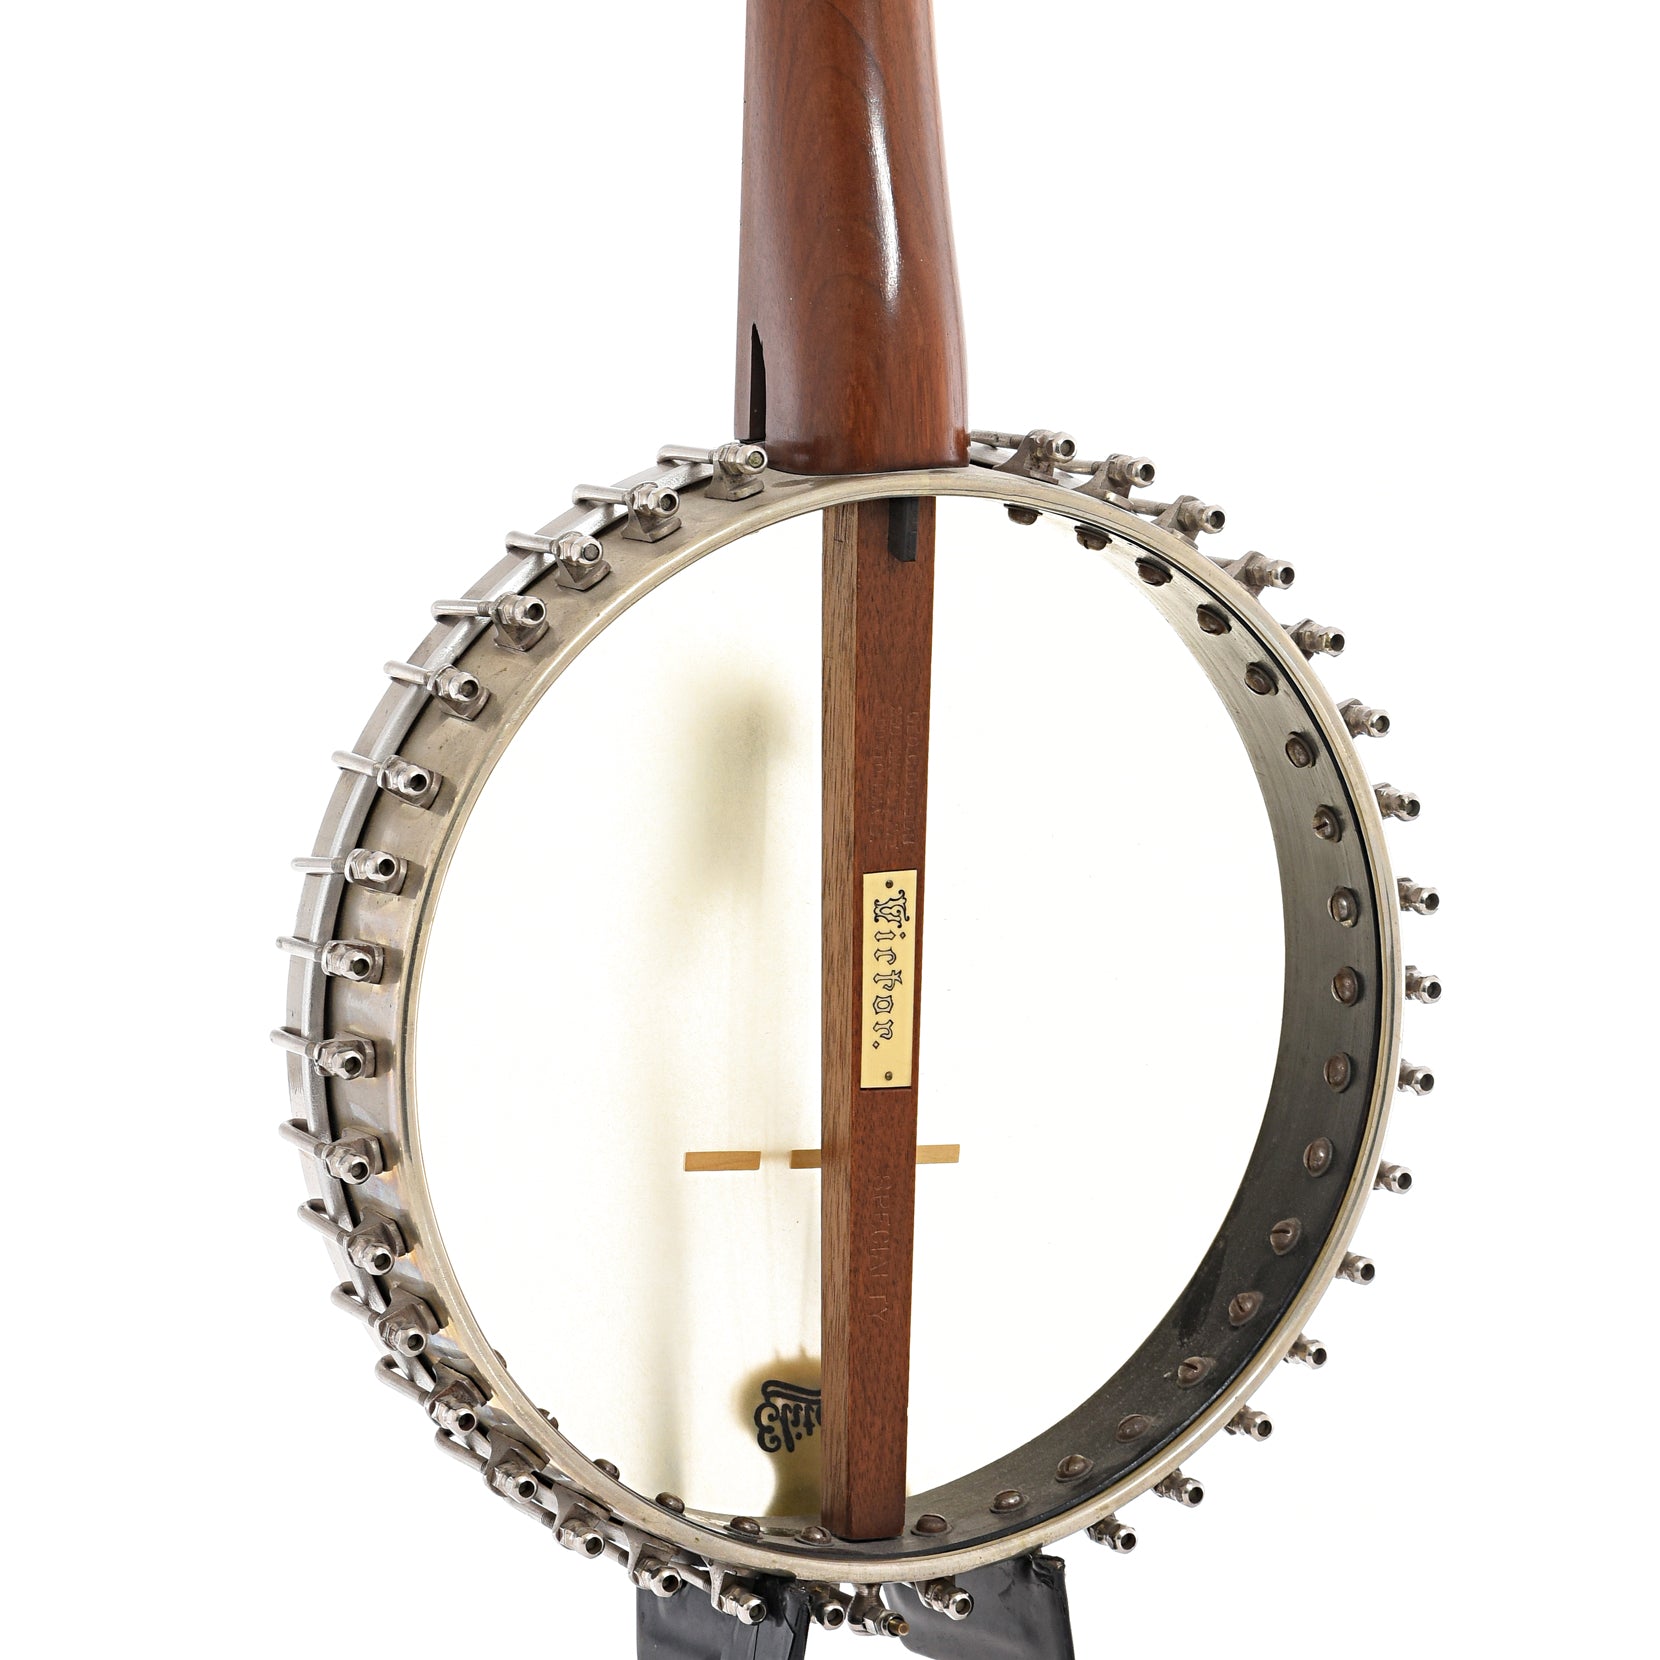 Back and side of Dobson Victor No.2 Specialty Openback Banjo (c.1887)